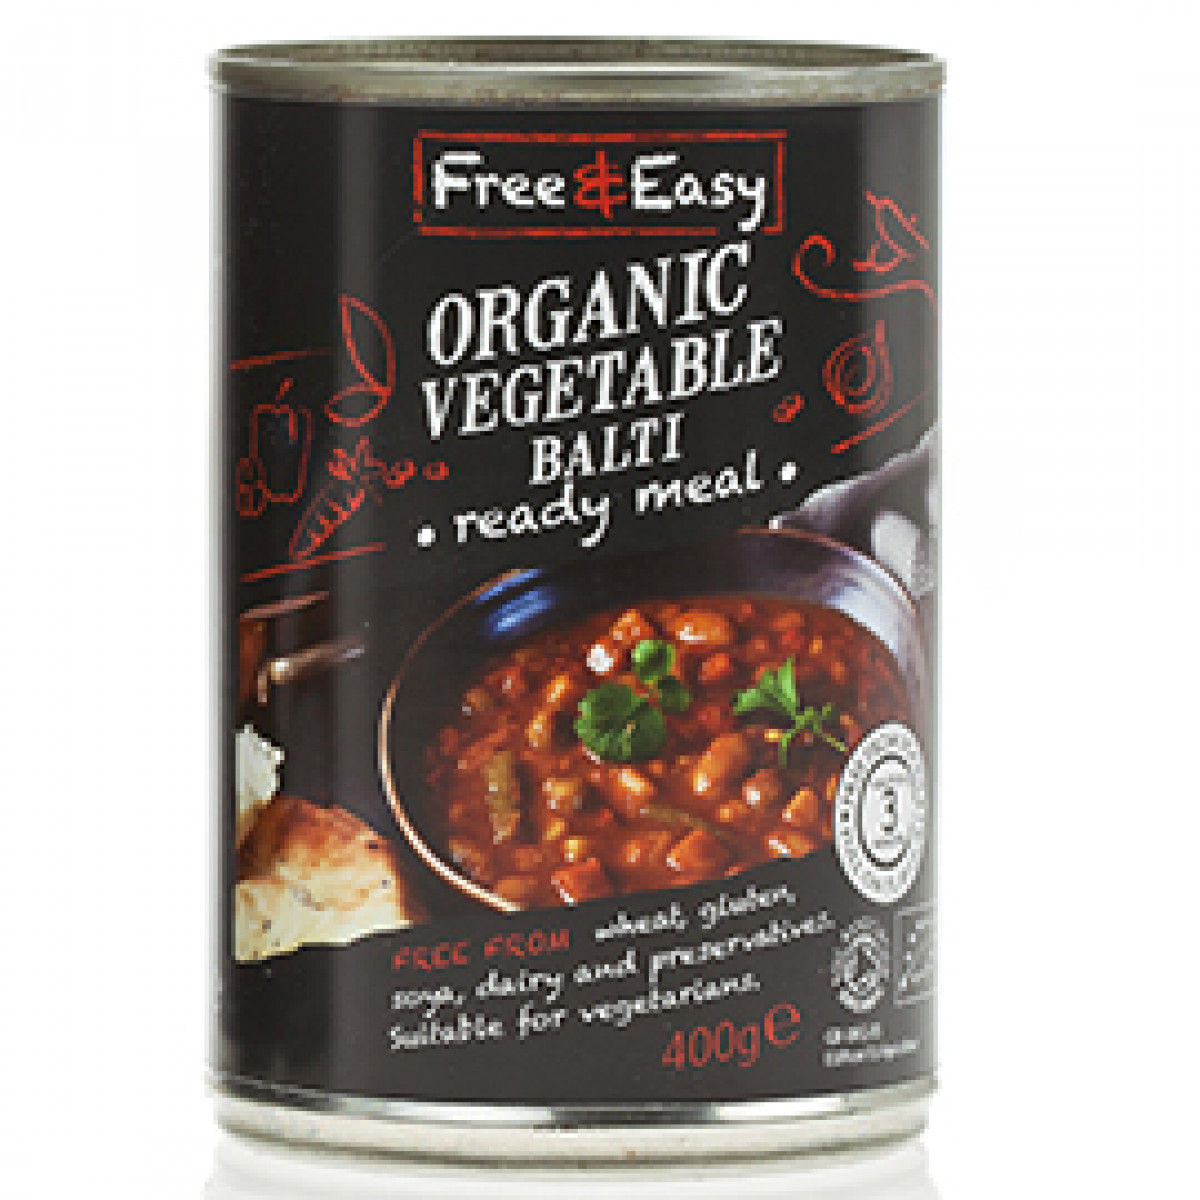 Product picture for Tinned Ready Meal - Vegetable Balti